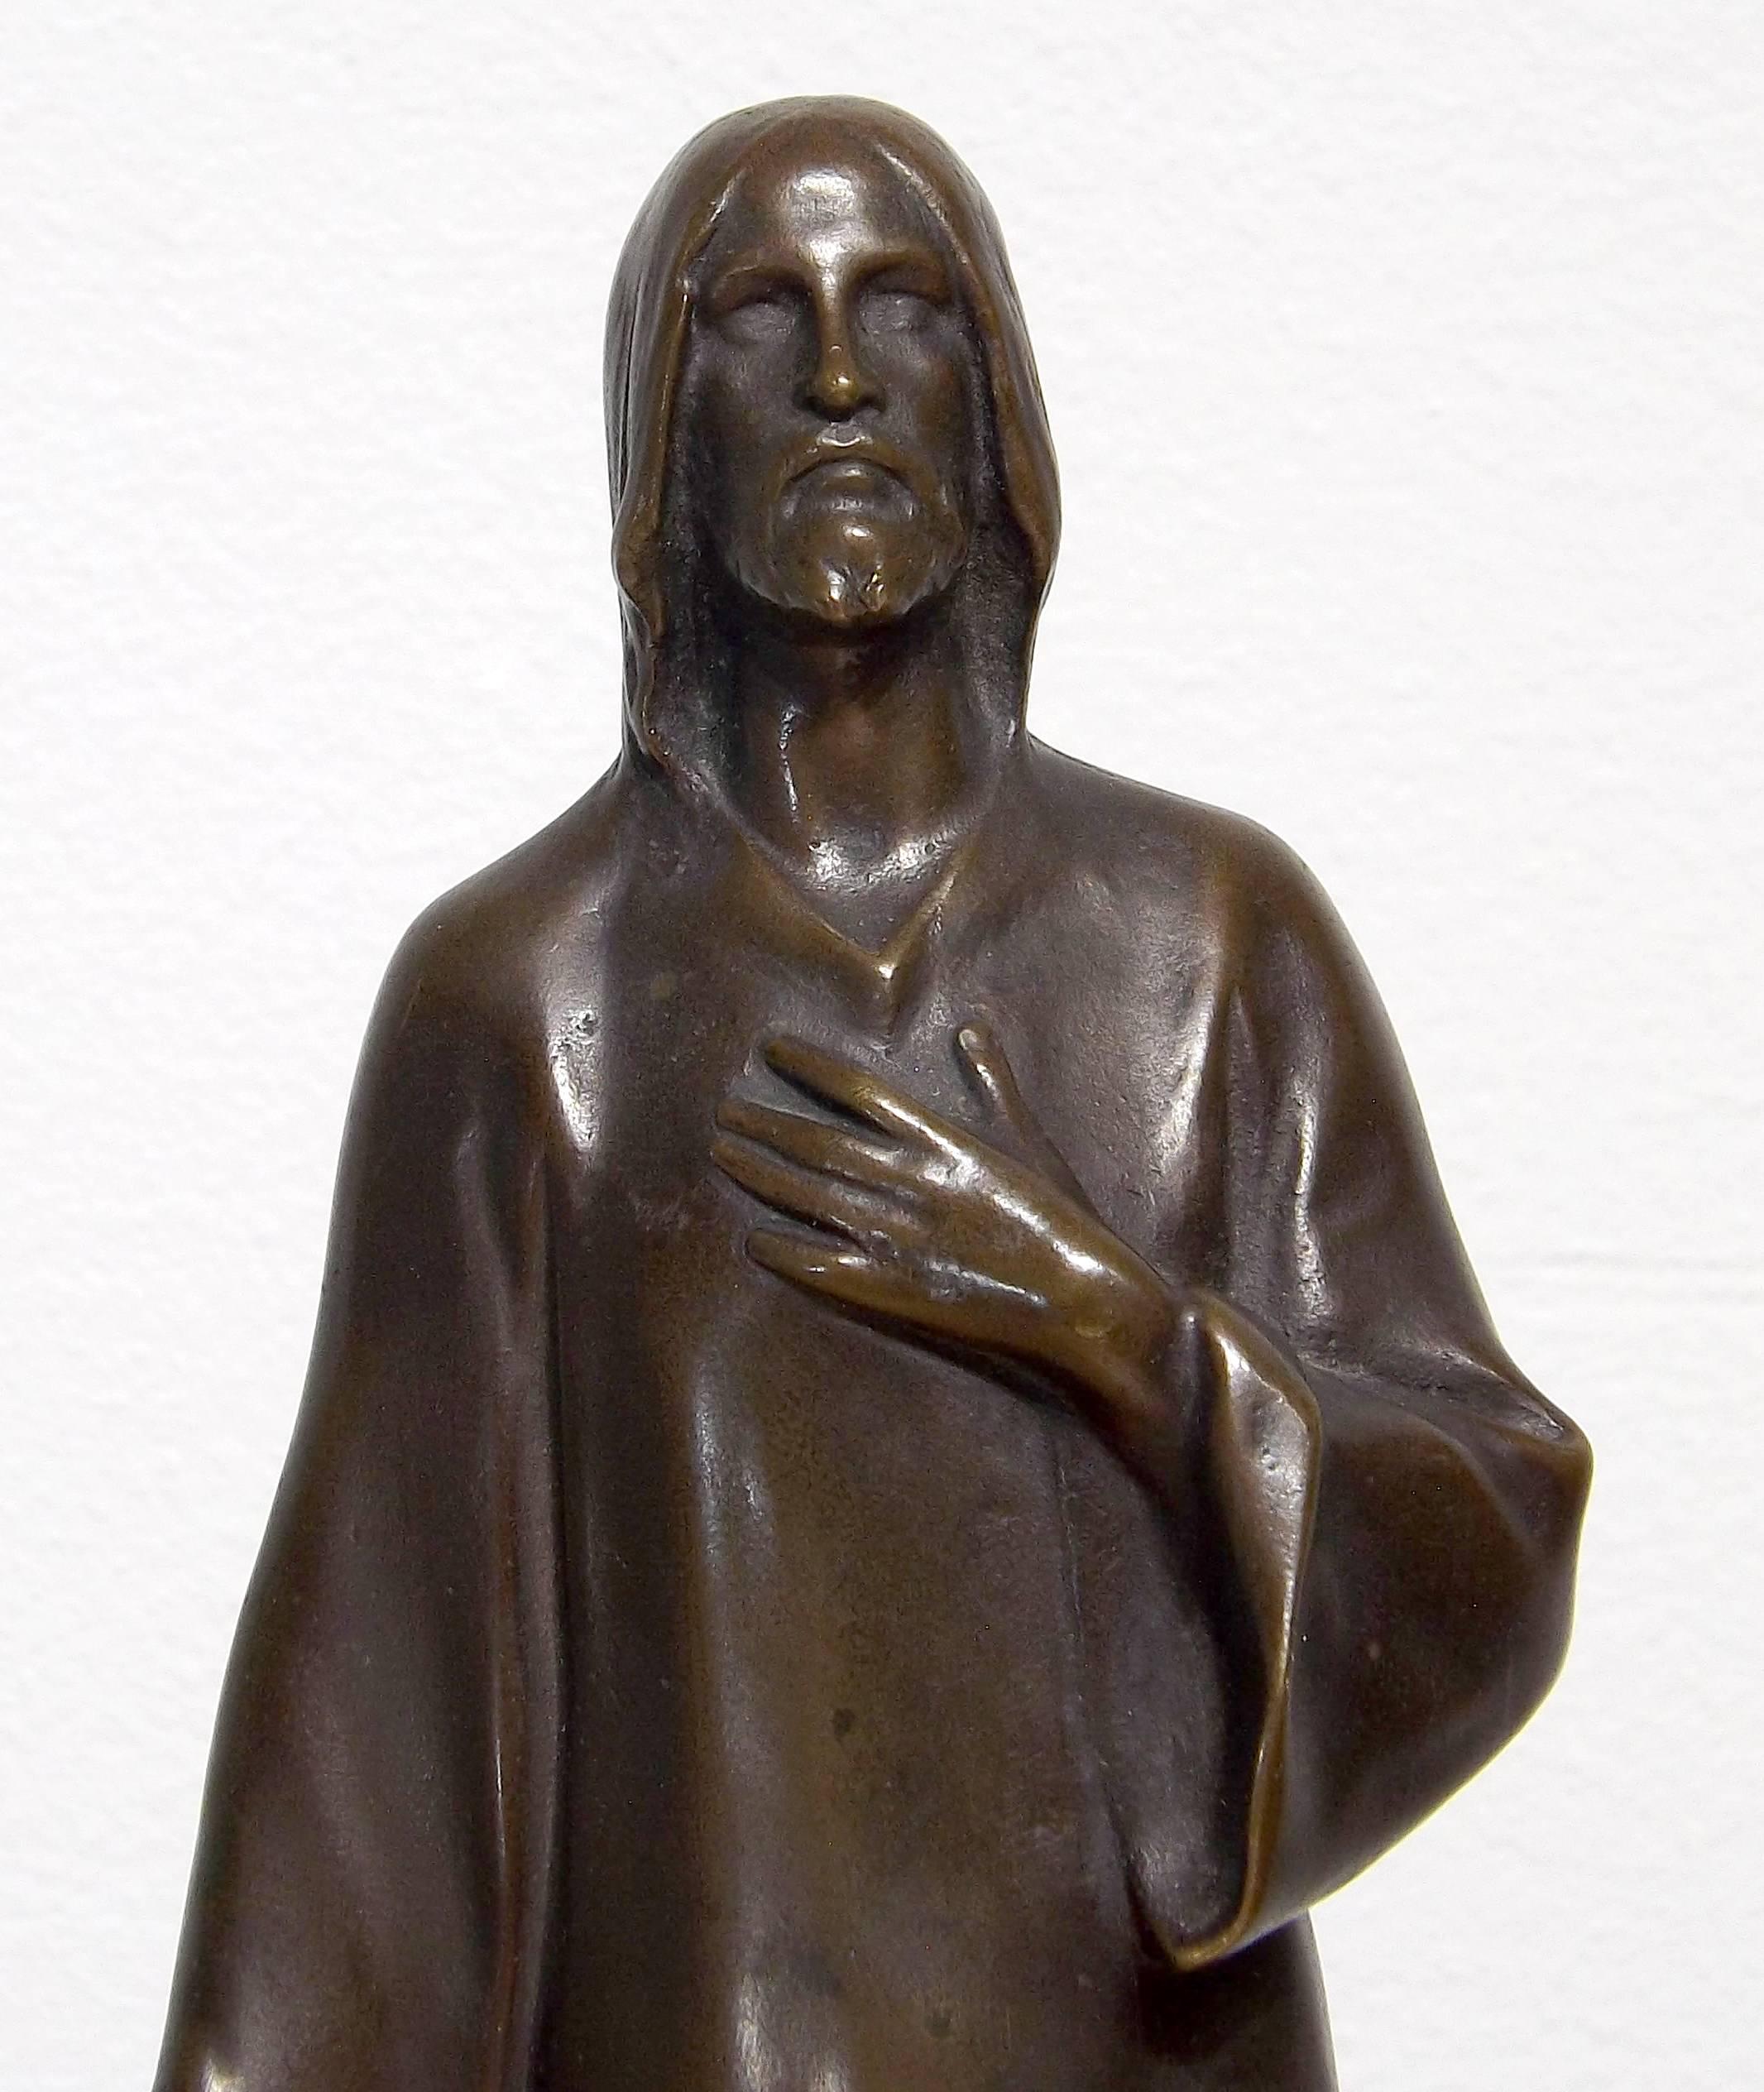 A wonderful and highly detailed bronze of Jesus Christ by Austrian sculptor Hans Muller (1873-1937).

Muller was a graduate of The Academy of Fine Arts in Vienna where he studied under Edmund von Hellmer. After World War I he was entrusted with